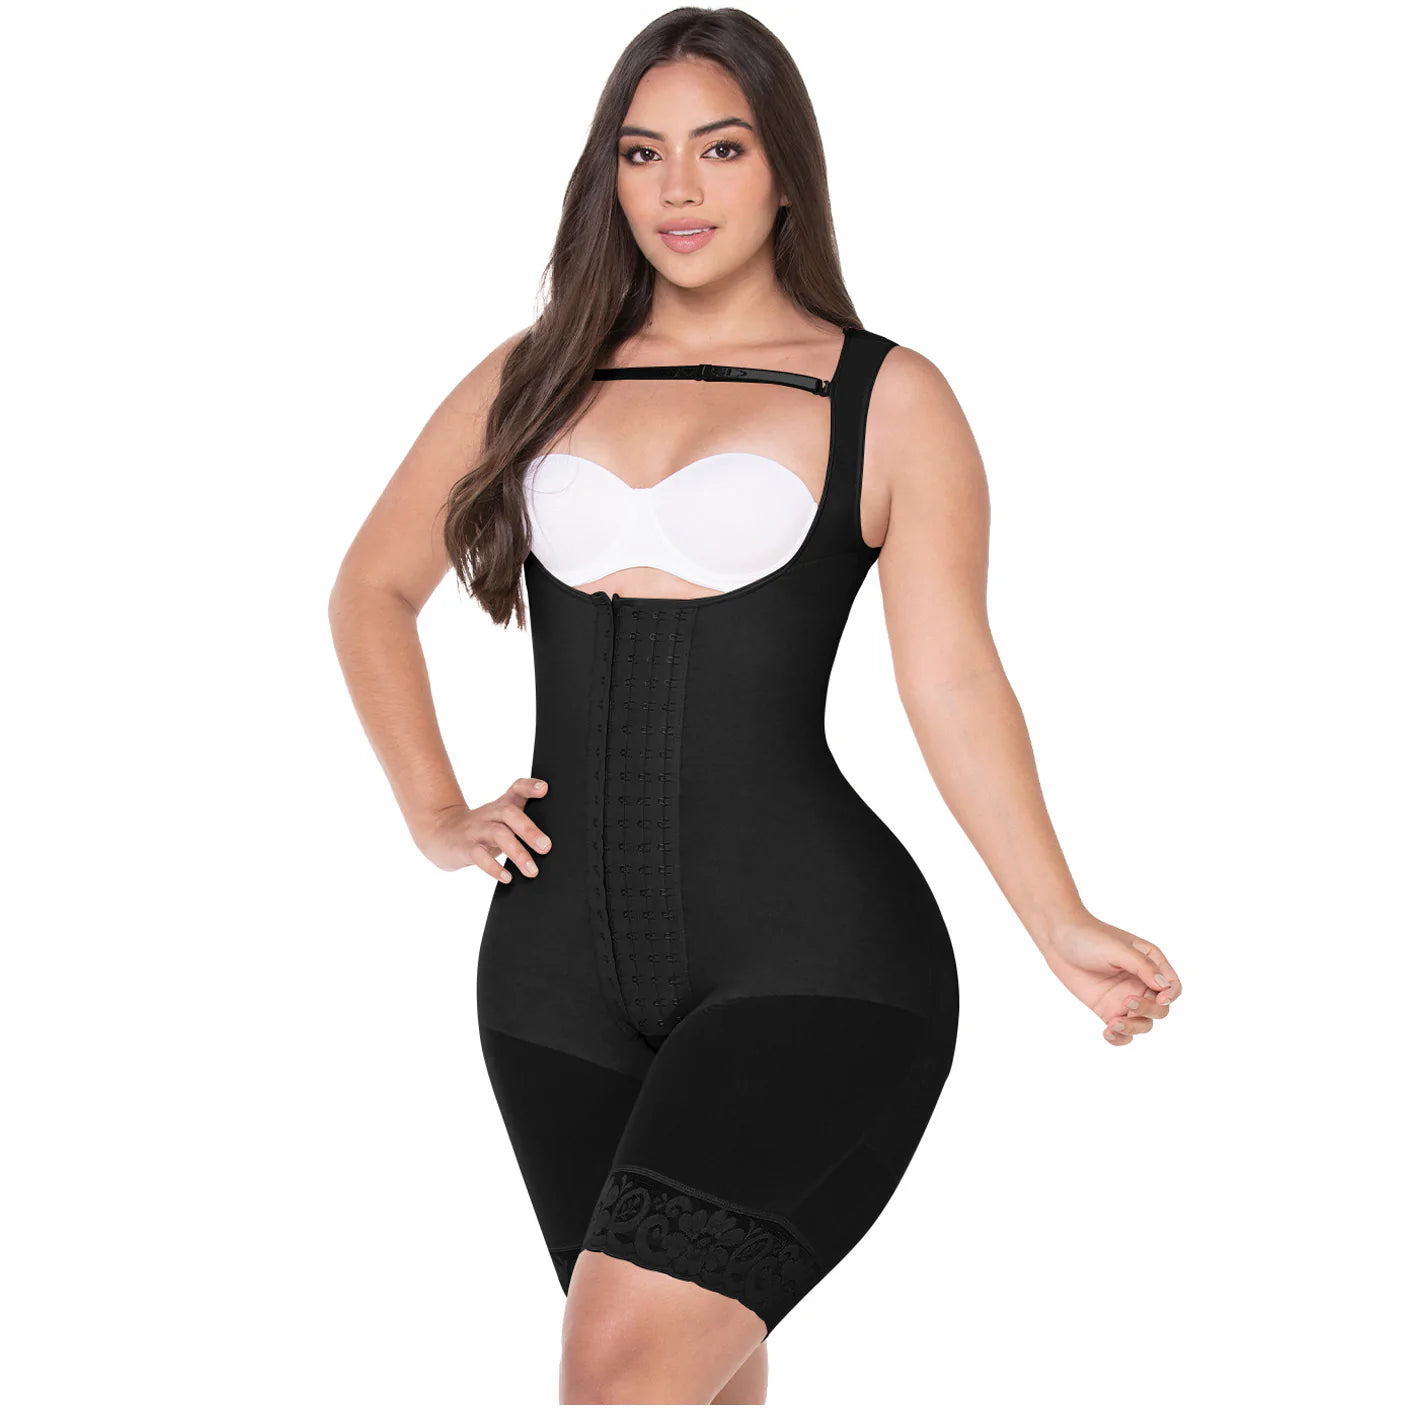 MYD 0075 Fajas Colombianas Reductoras Post Surgery Girdles Full Body Shaper  for Women Black 2XS 